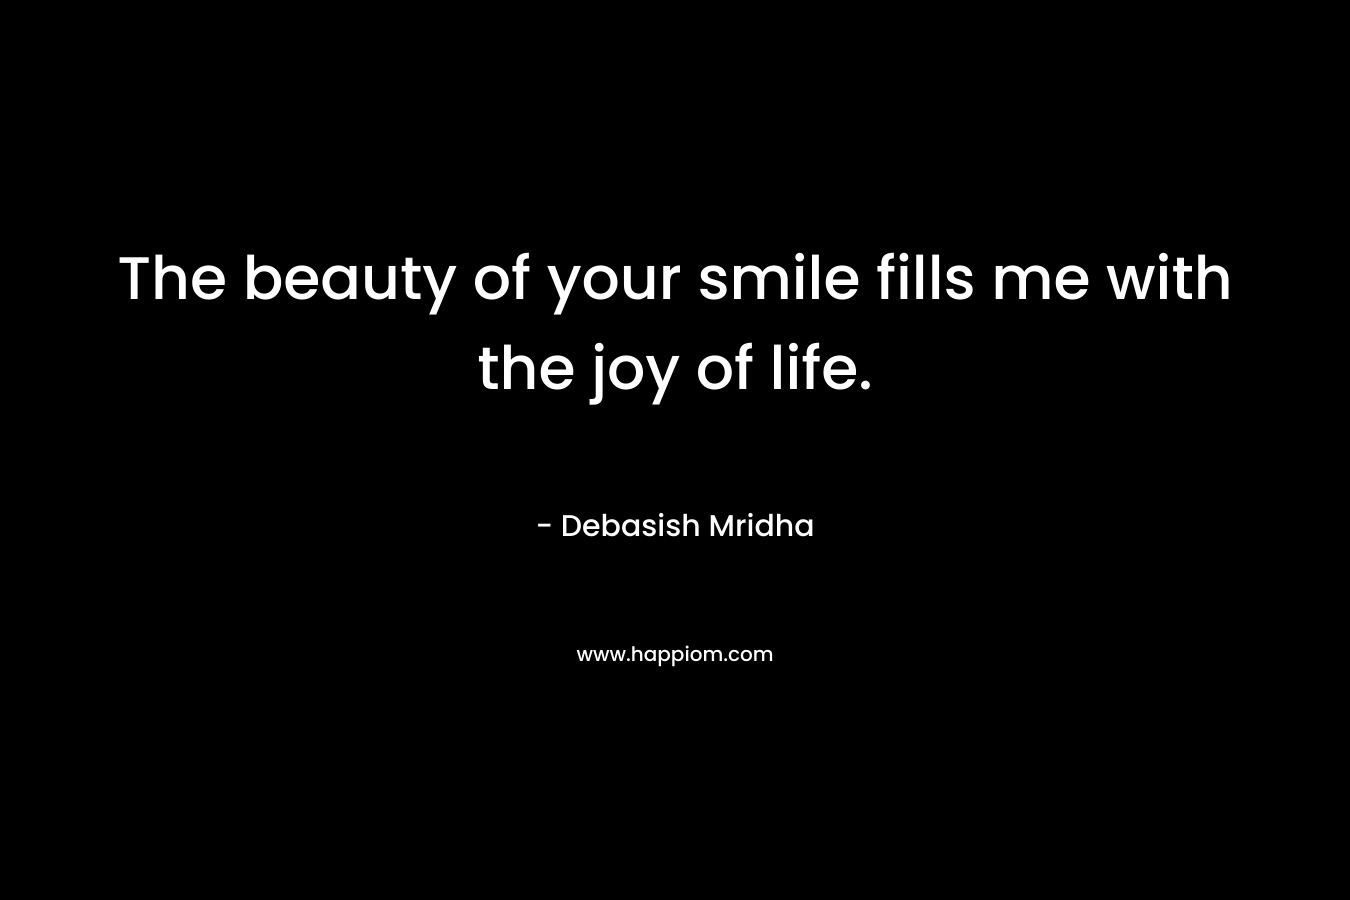 The beauty of your smile fills me with the joy of life.